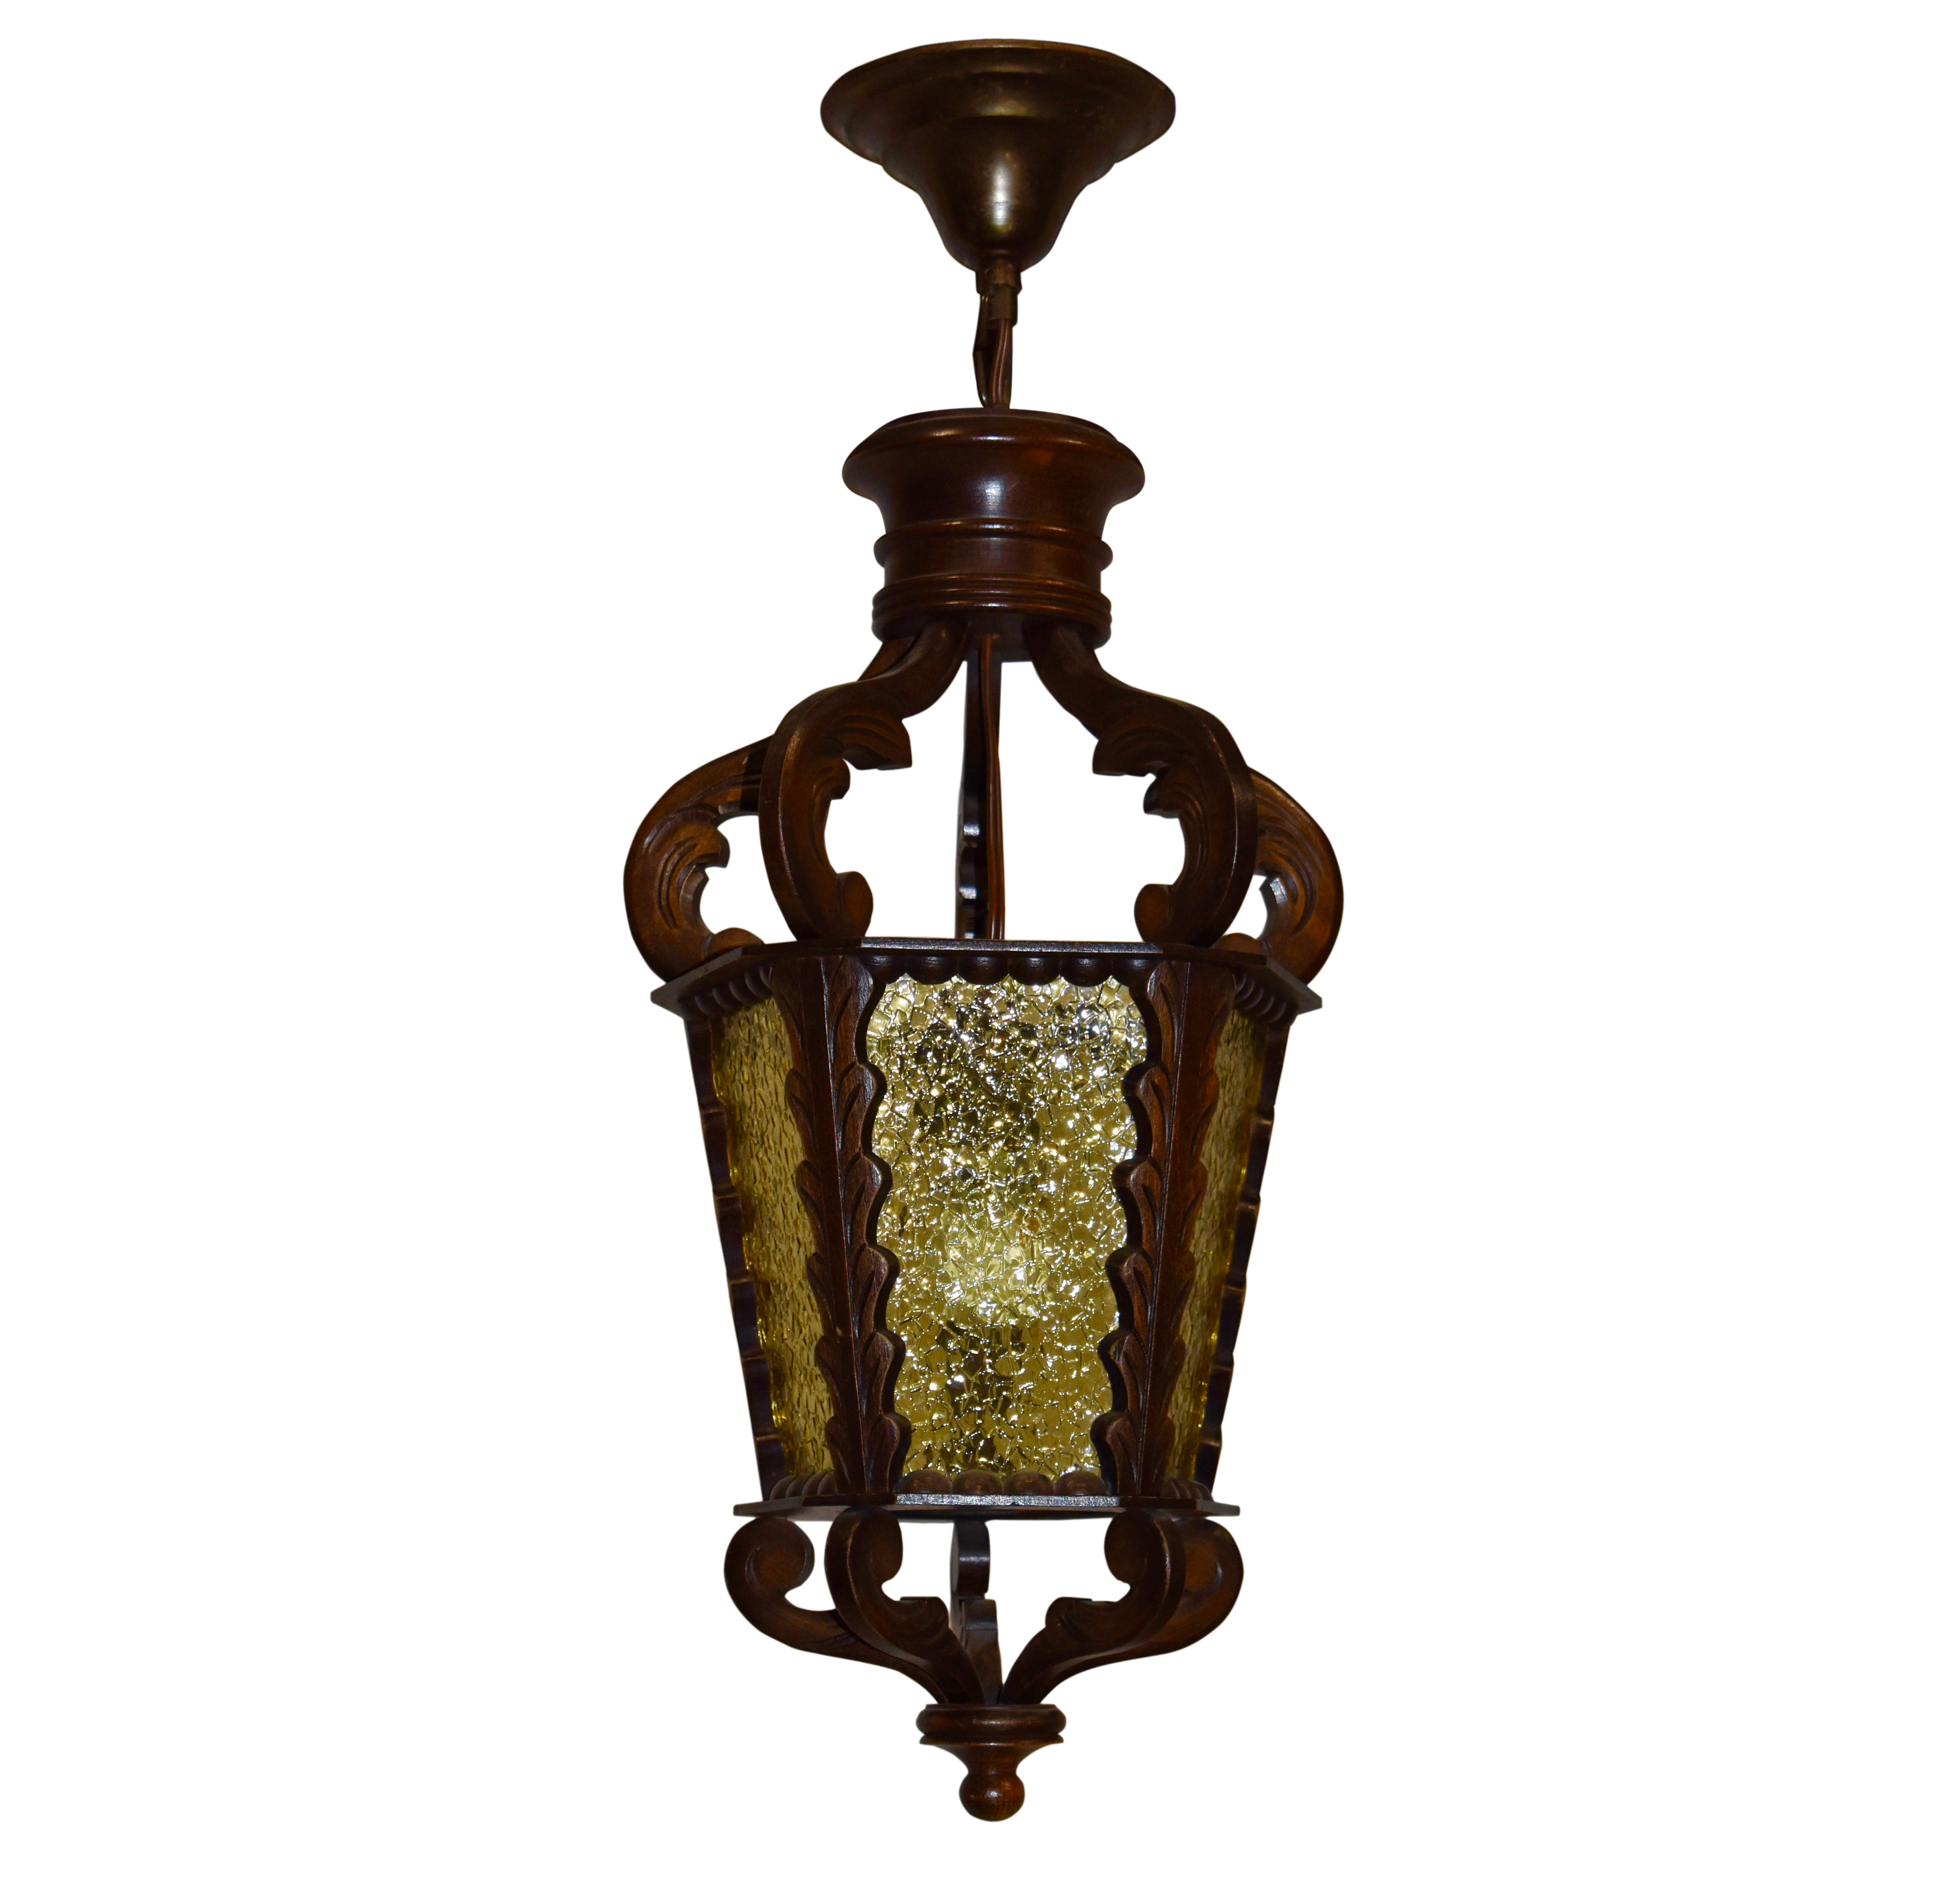 Carved Hanging Pendant Lantern Light Fixture with Stained Glass